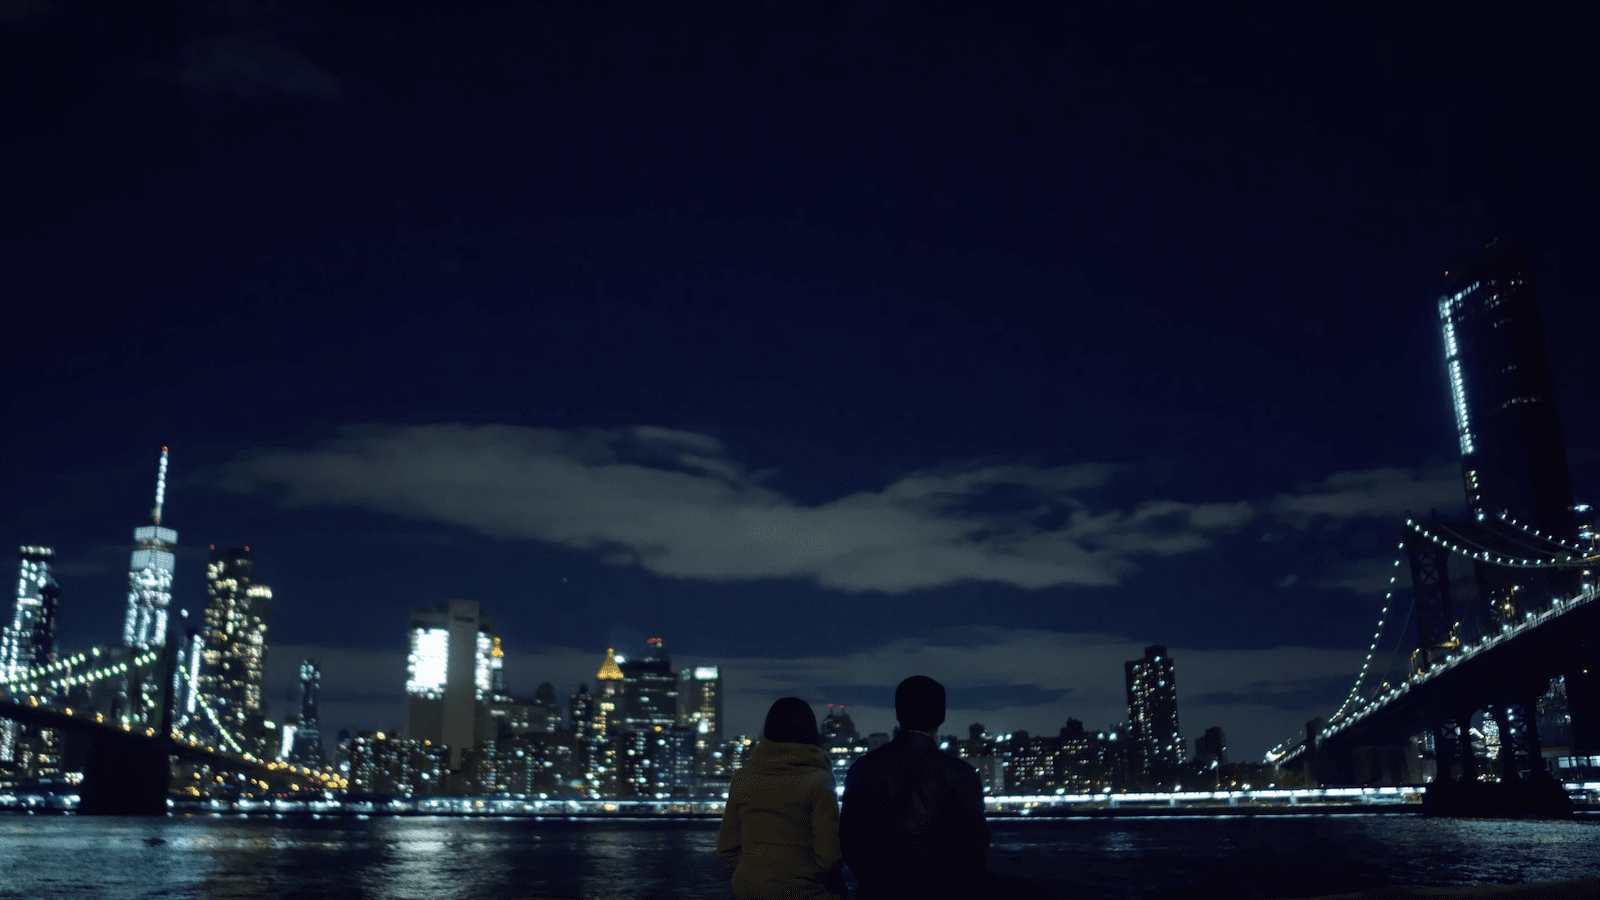 View from behind of man and woman looking out over the city at night